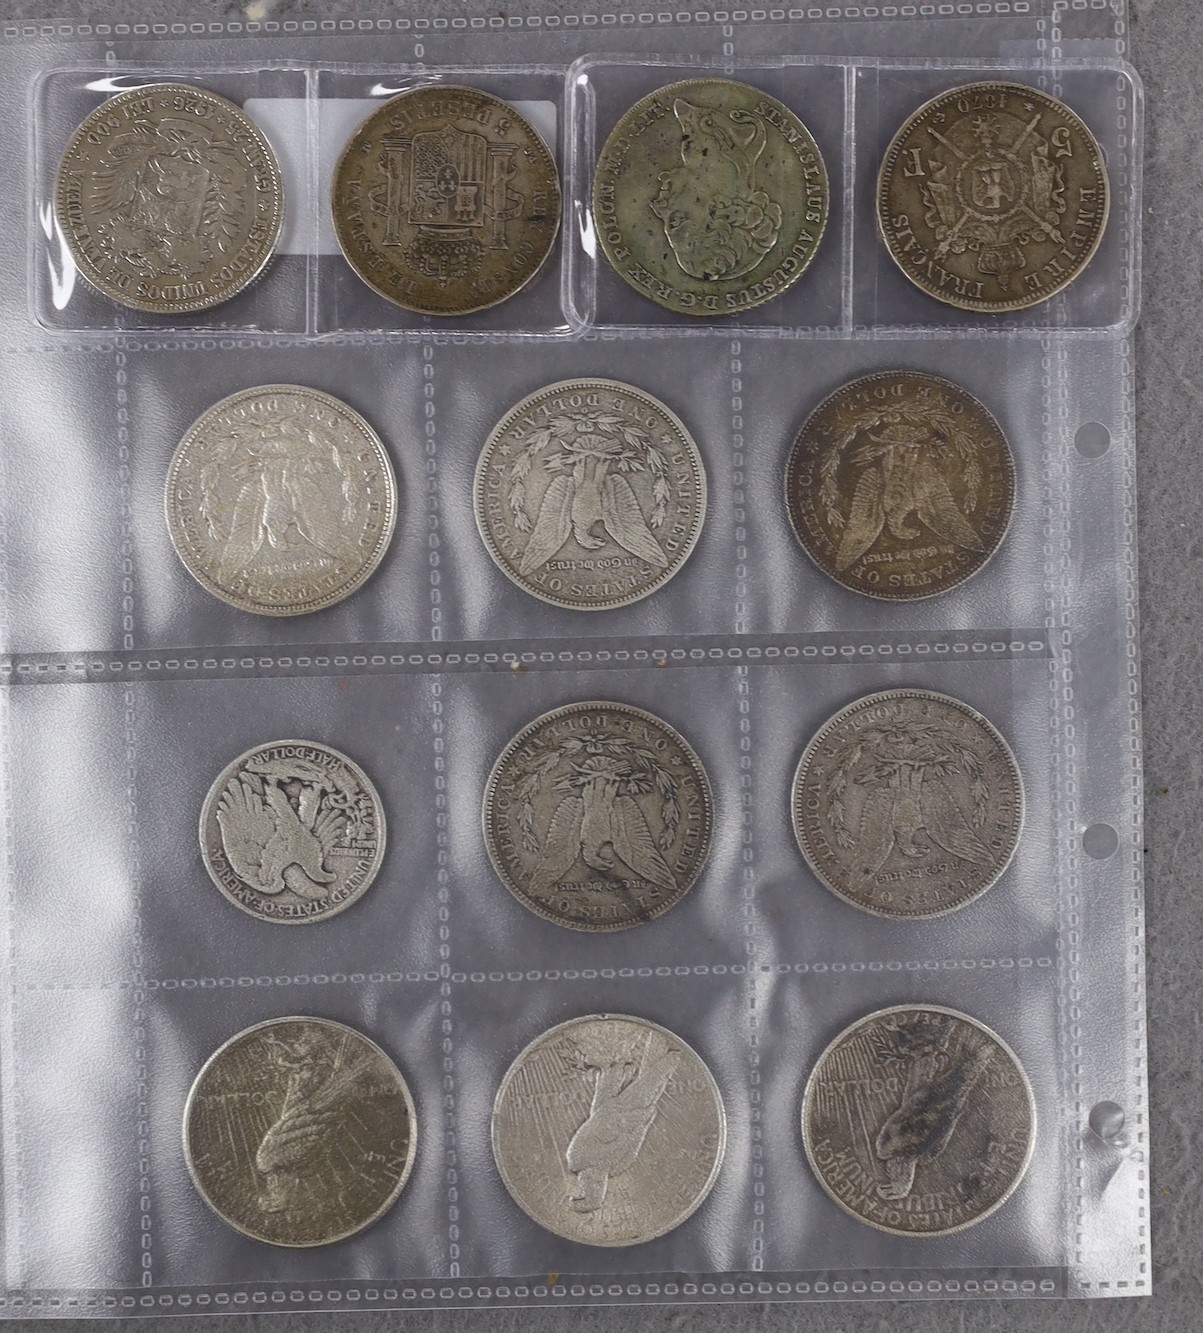 U.S.A. coins, five Morgan dollars 1878, 1888, 1891, 1895 and 1921, three other dollars 1924, 1925